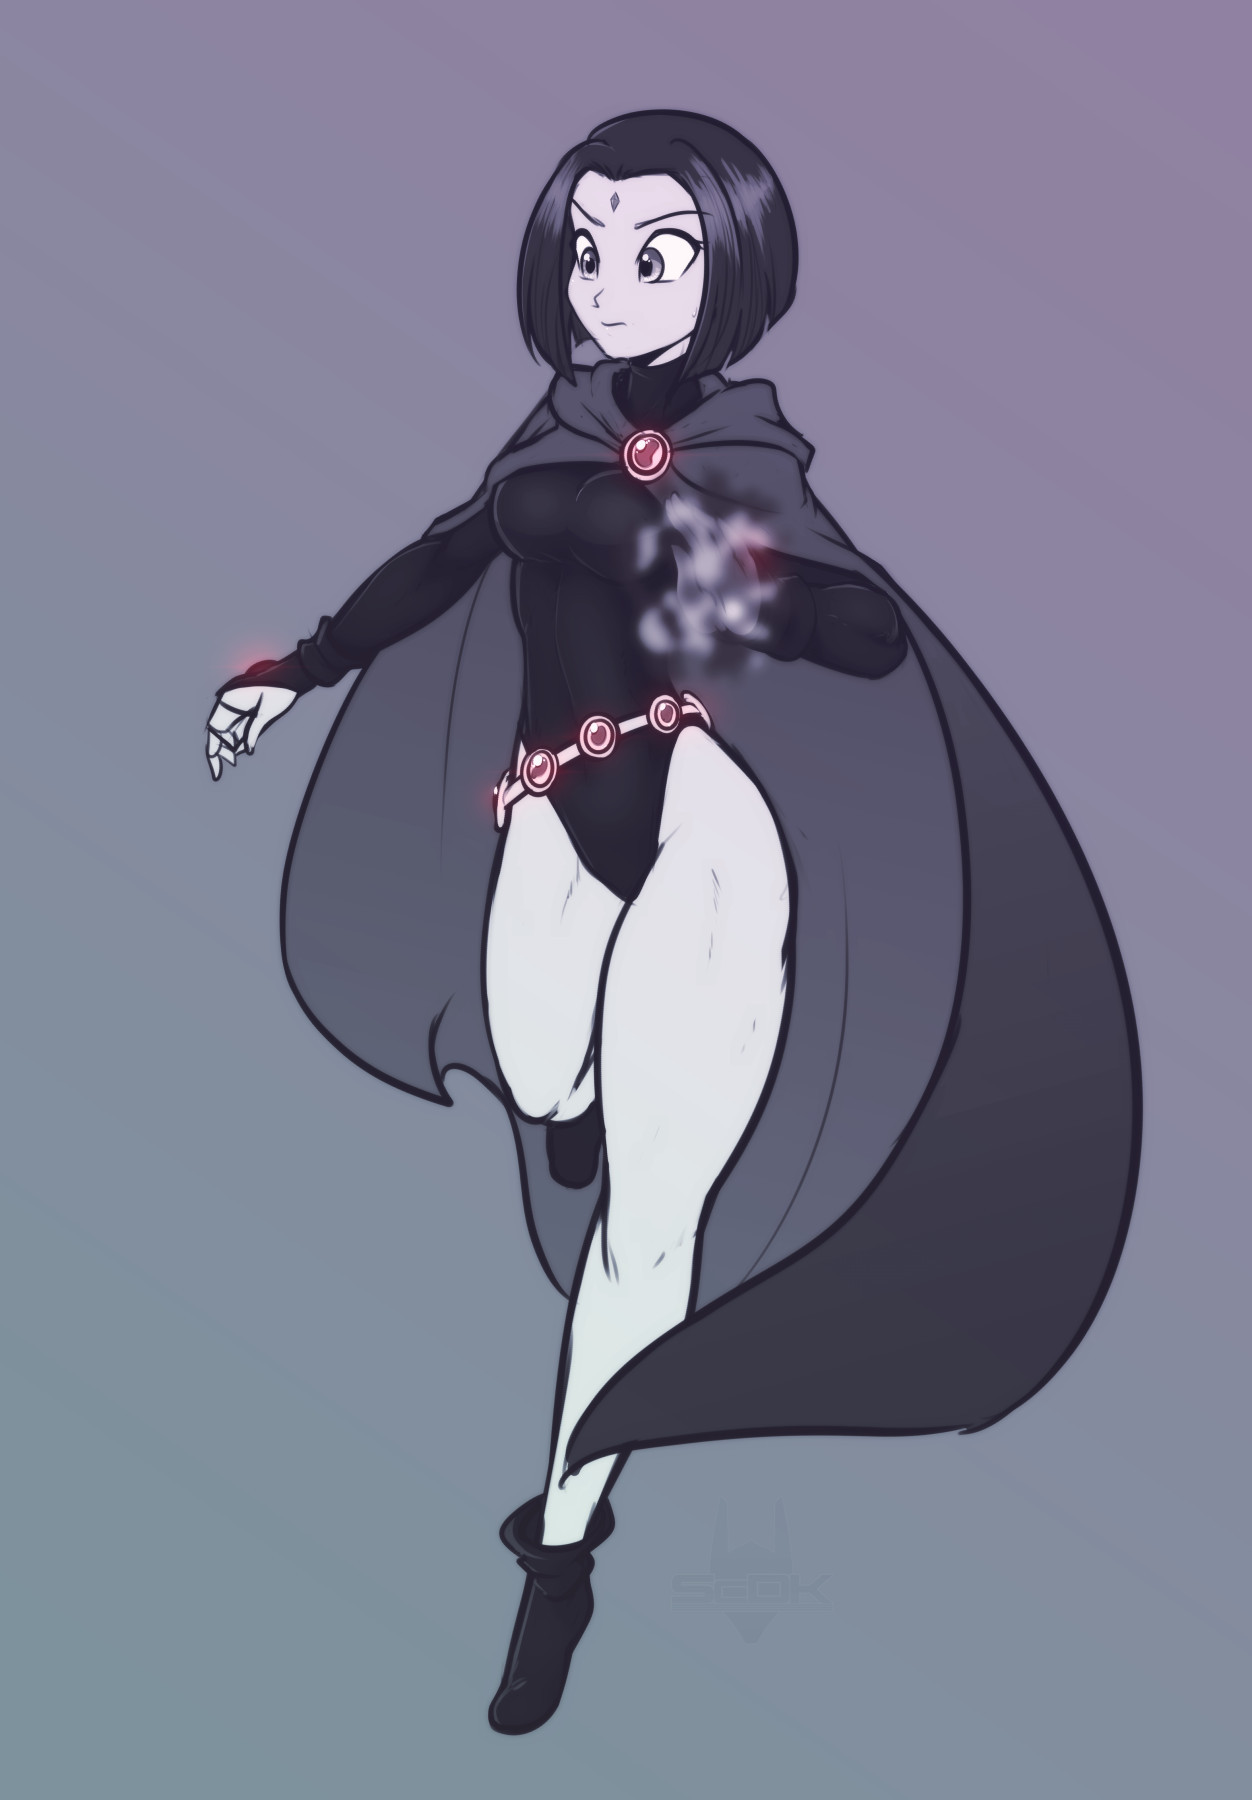 scdk-nsfw: scdk-nsfw:  scdk-sfw:  Doodle - Raven If someone draws a character well